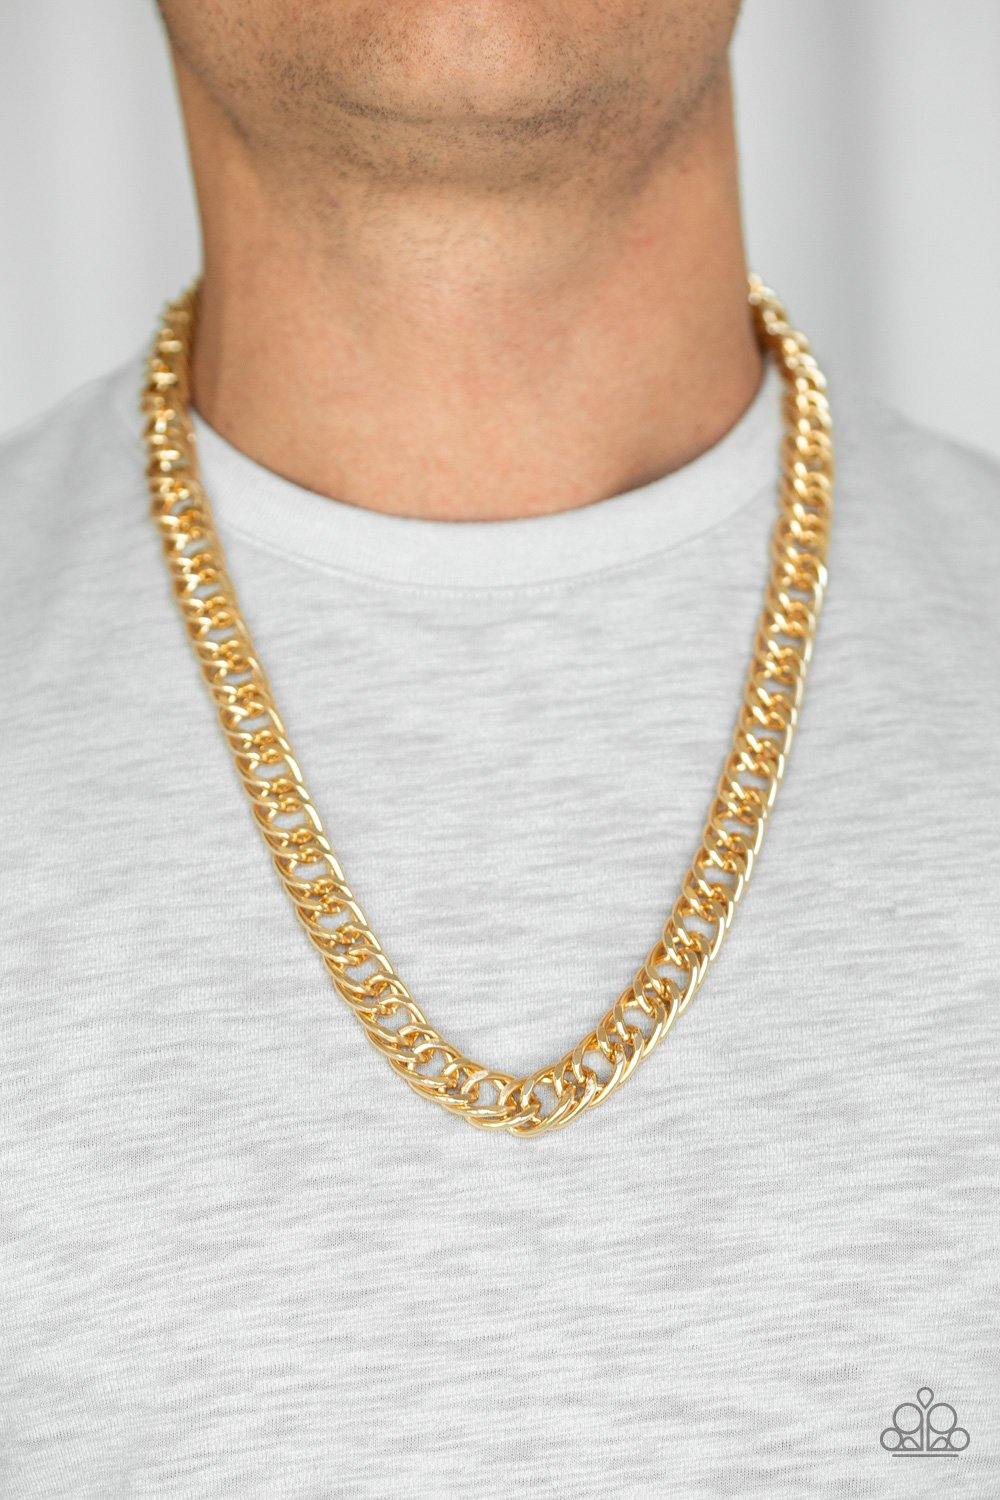 Omega Gold Men's Necklace - Nothin' But Jewelry by Mz. Netta